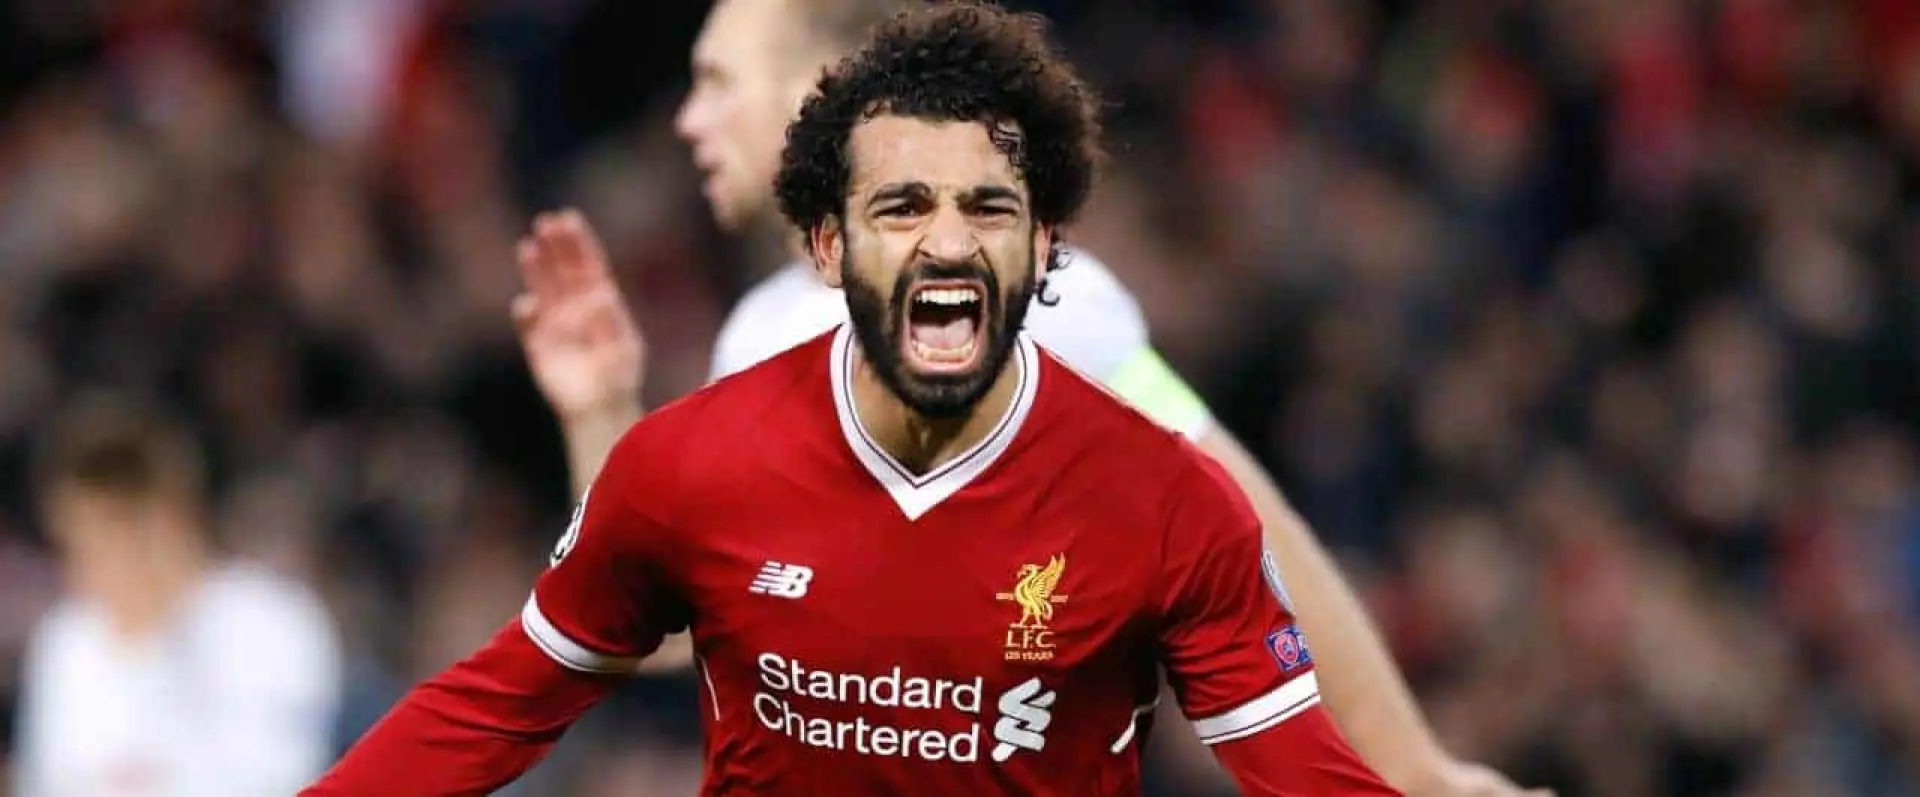 Liverpool odds, Manchester City odds, Premier League odds, Mo Salah odds, Premier League storylines this weekend